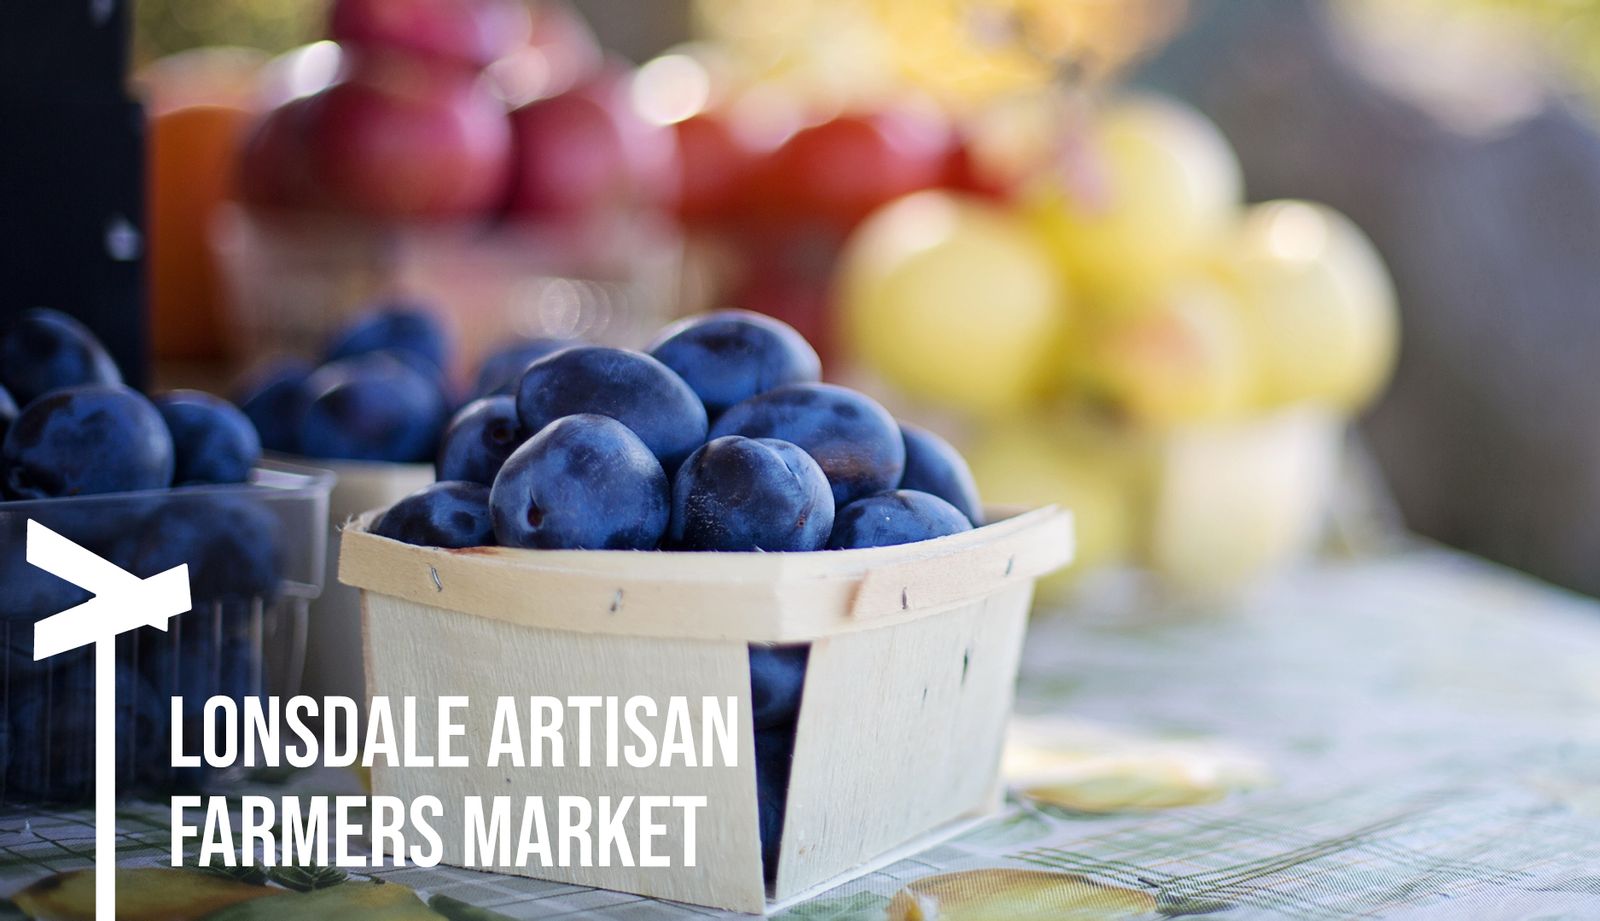 Lonsdale Artisan Farmers Market: May - October